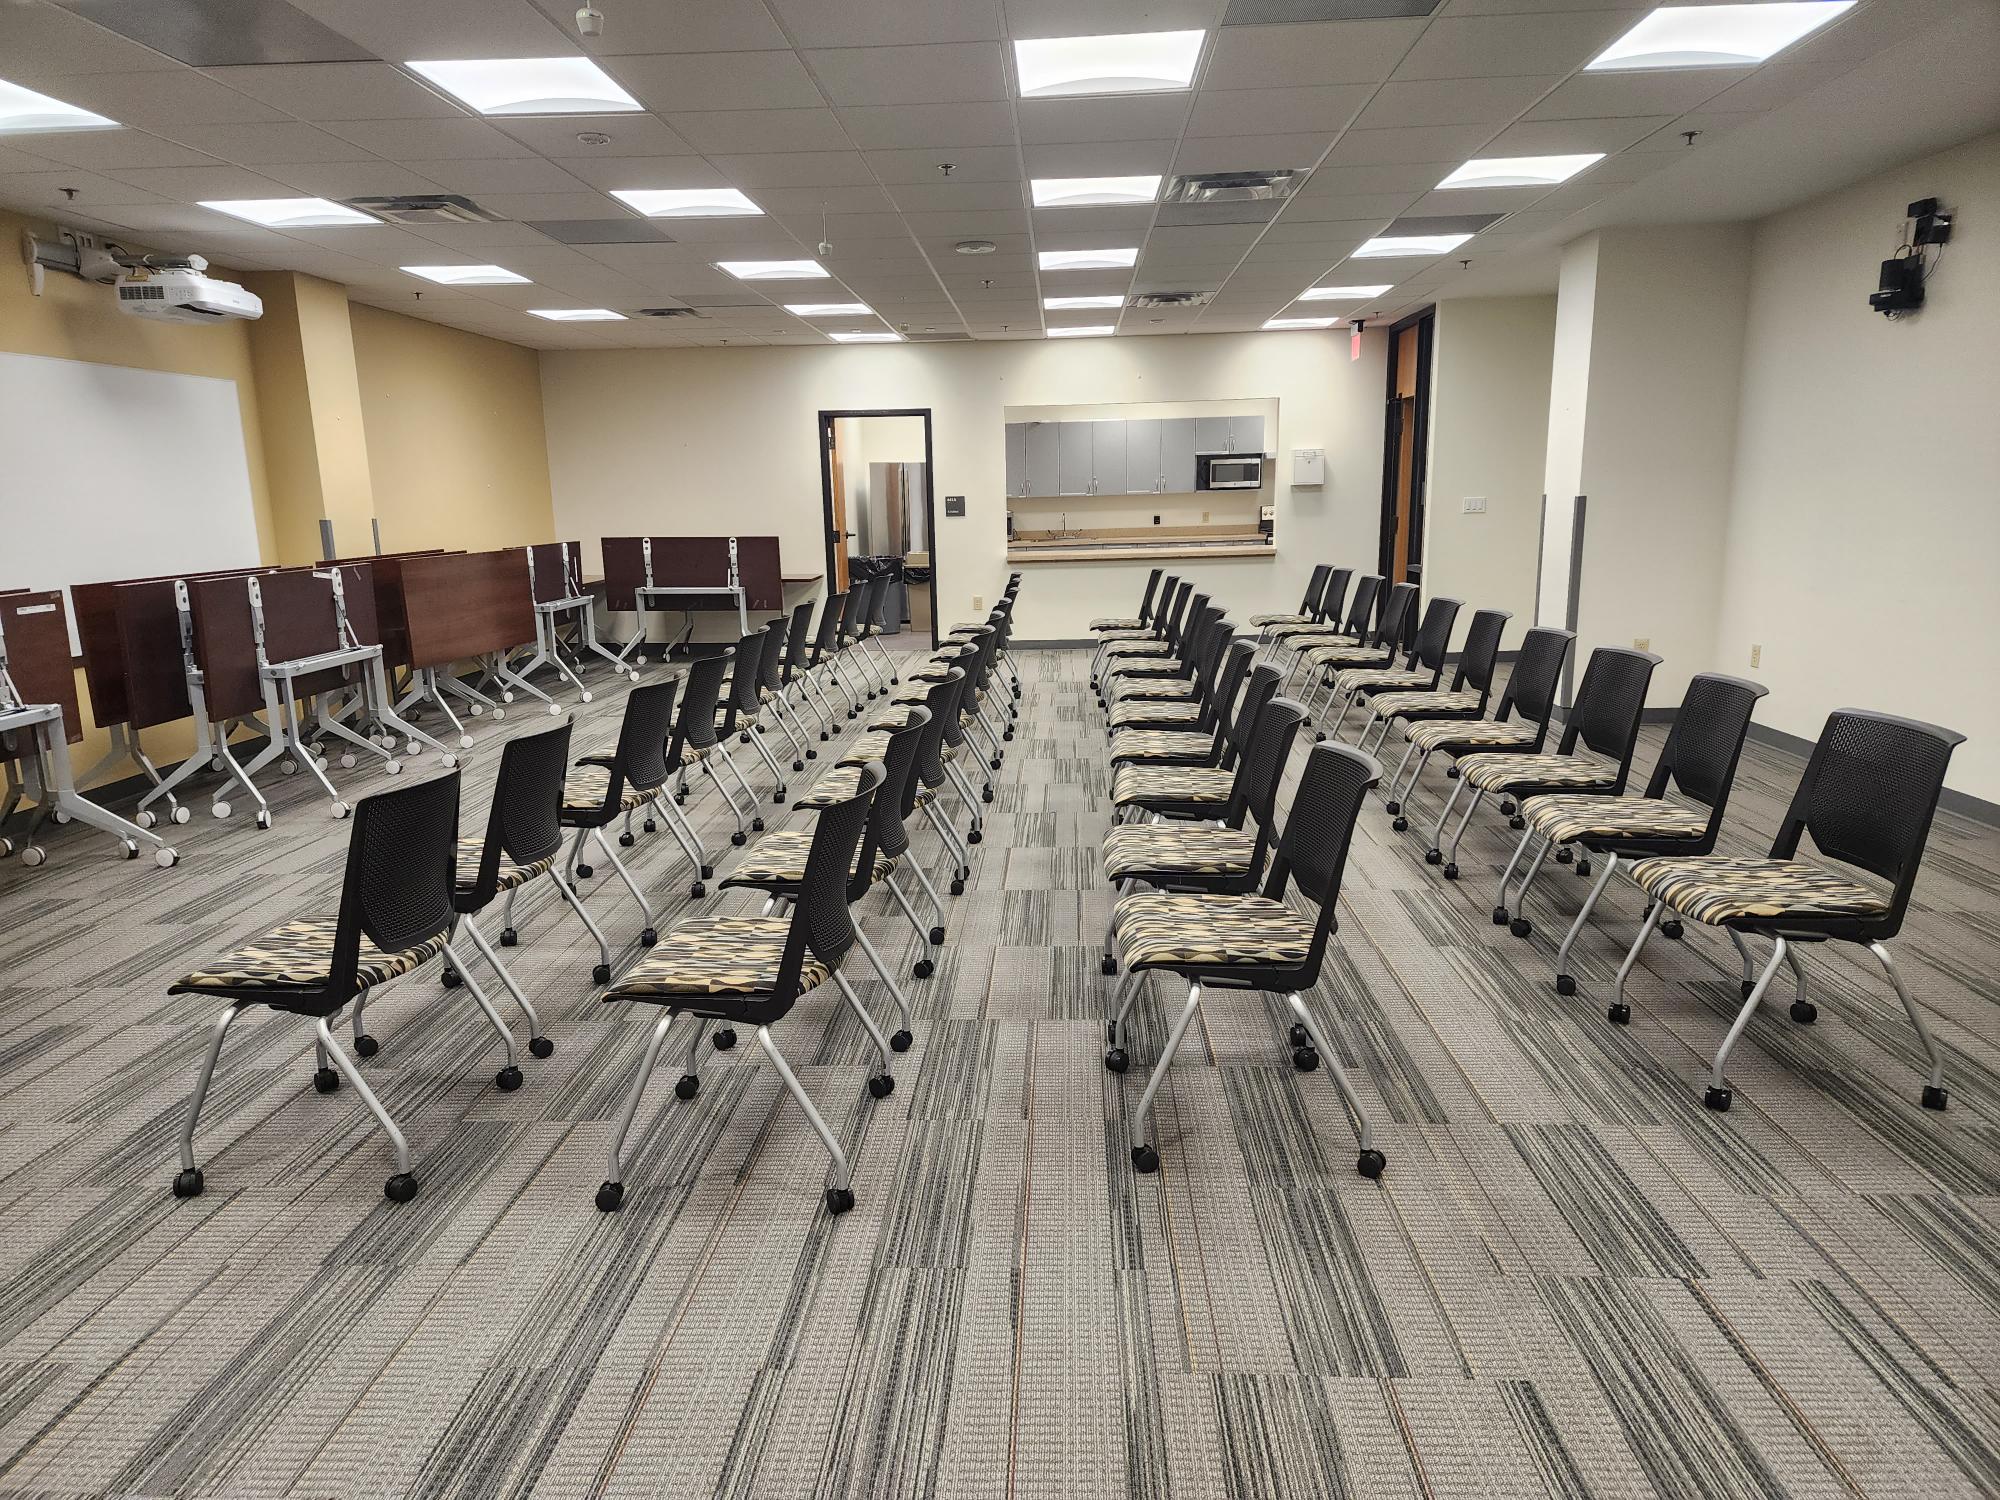 Conference halls with chairs in rows.